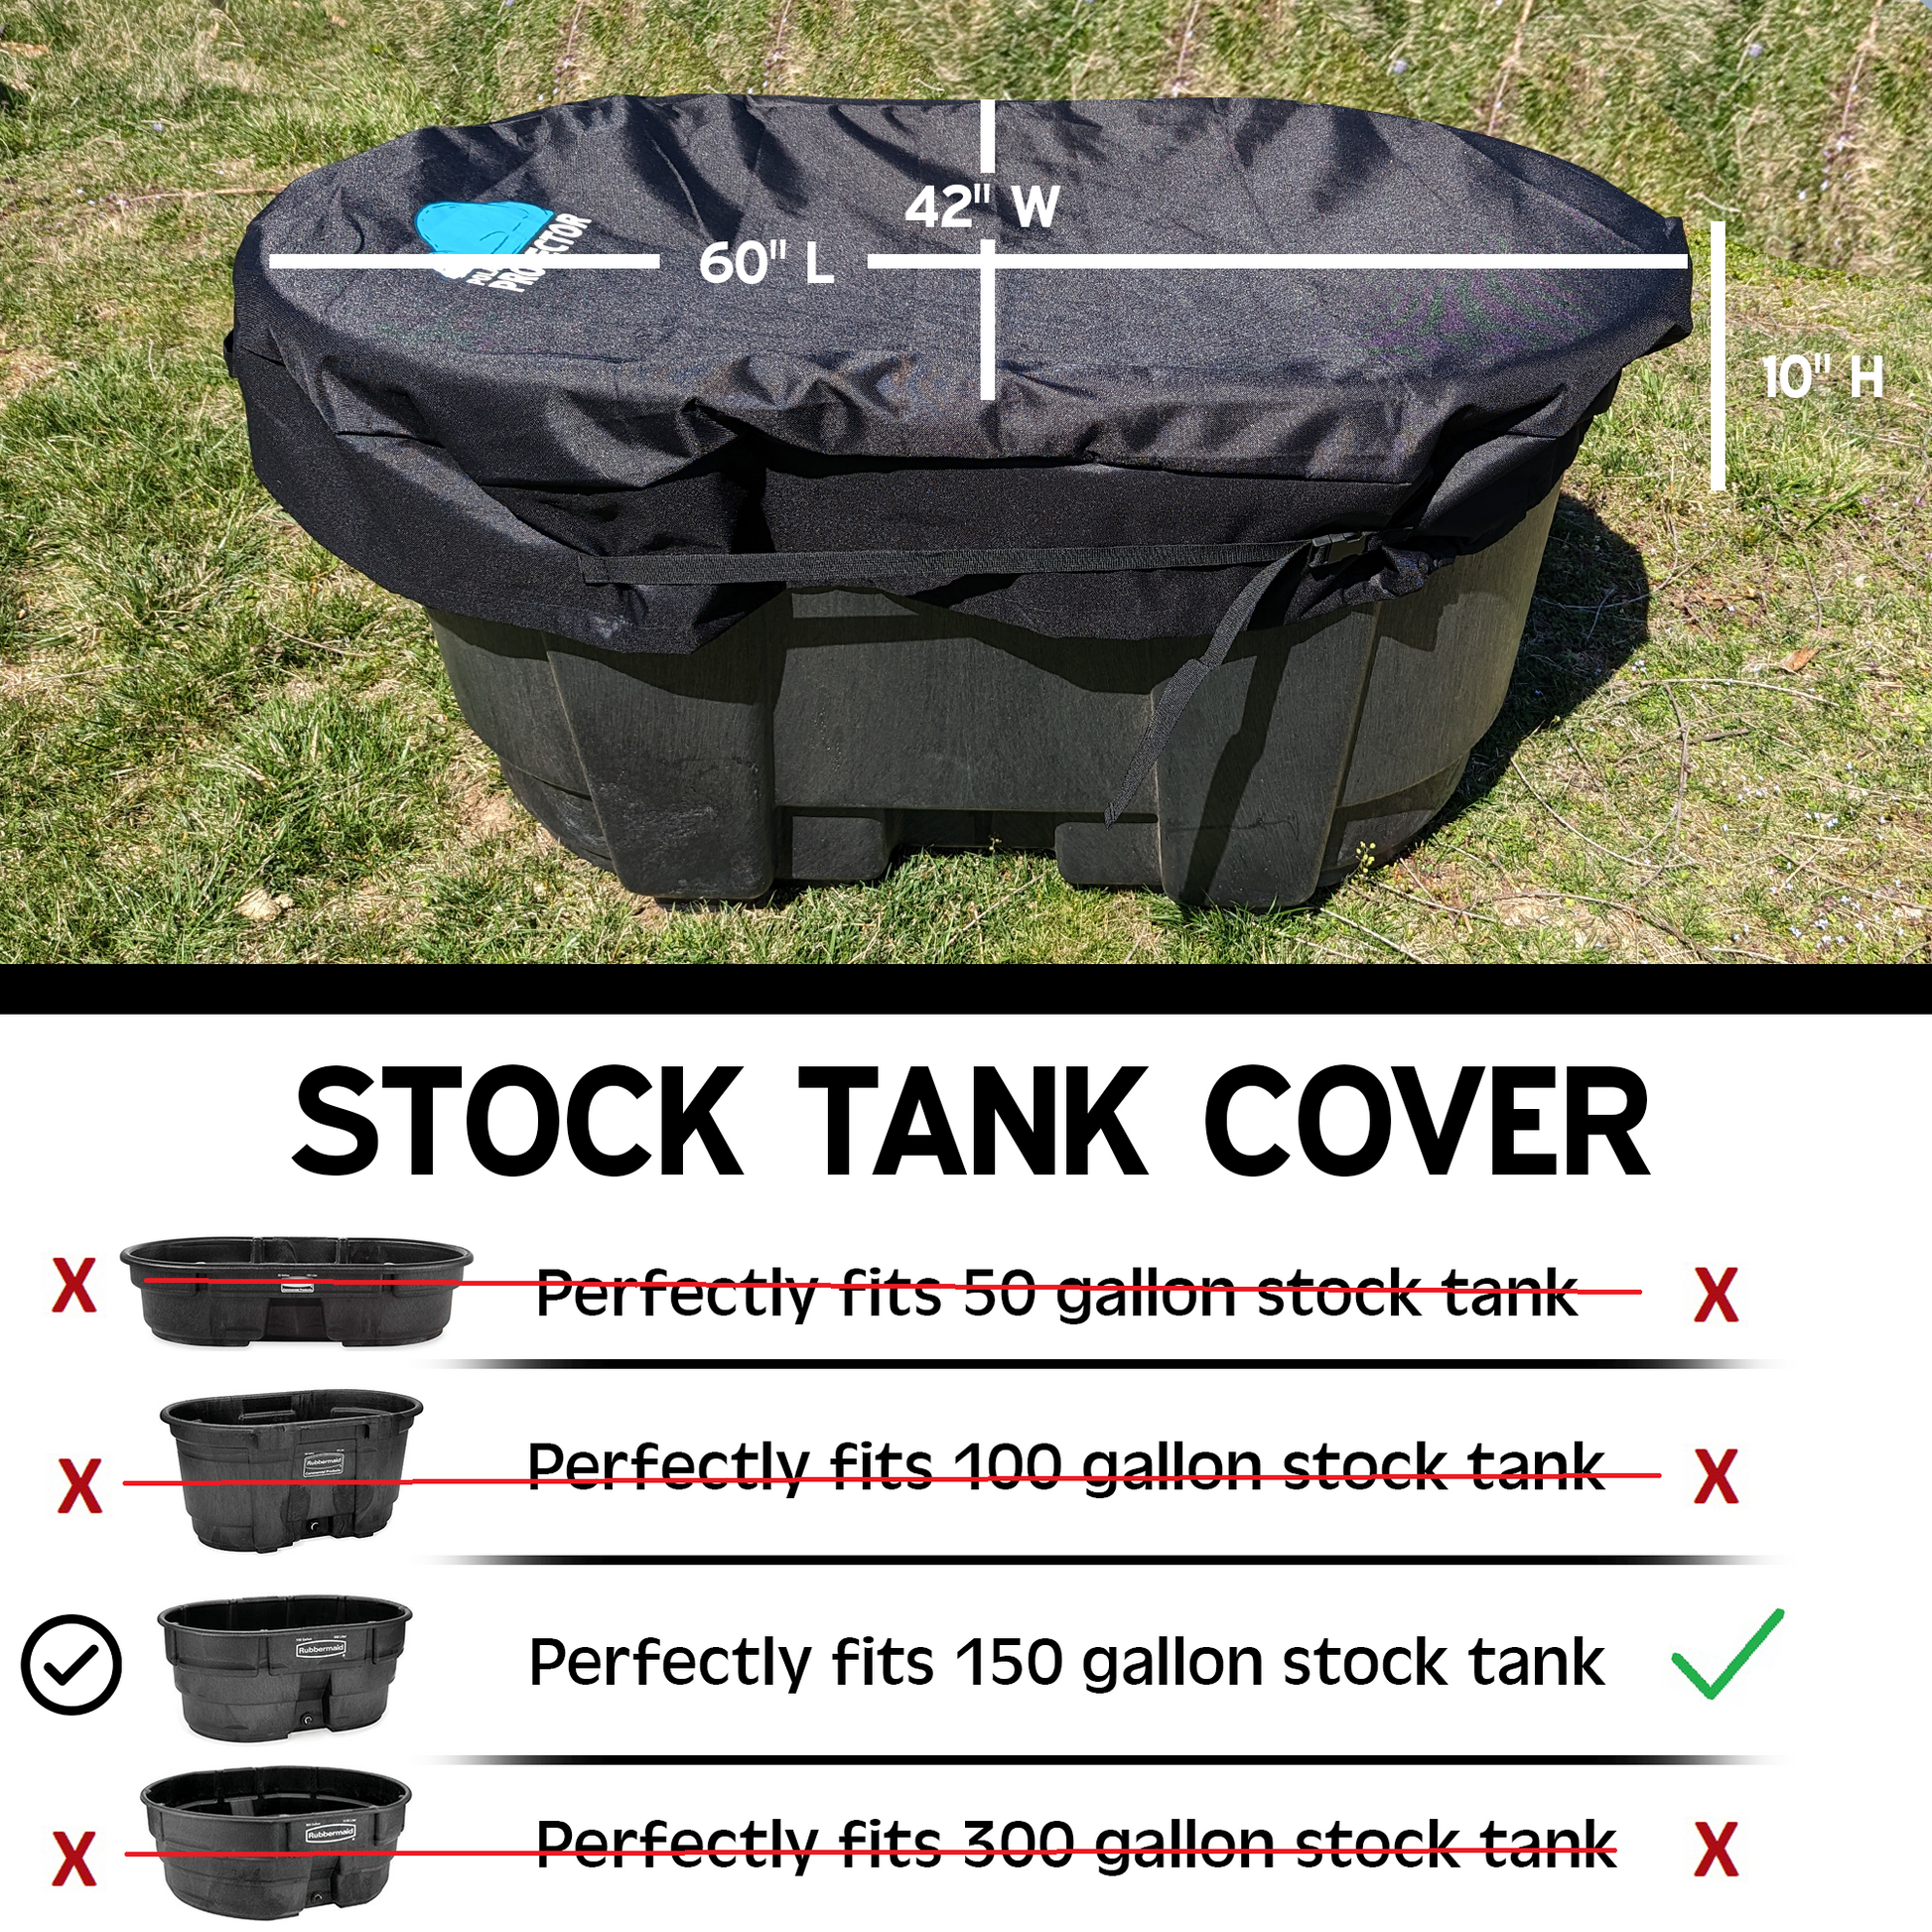 Polar Protector Stock Tank Cover Ice Water Therapy Ice Bath Cover  Waterproof Rip Proof Tough Fits 150 Gallon Rubbermaid Keeps Tanks Clean 